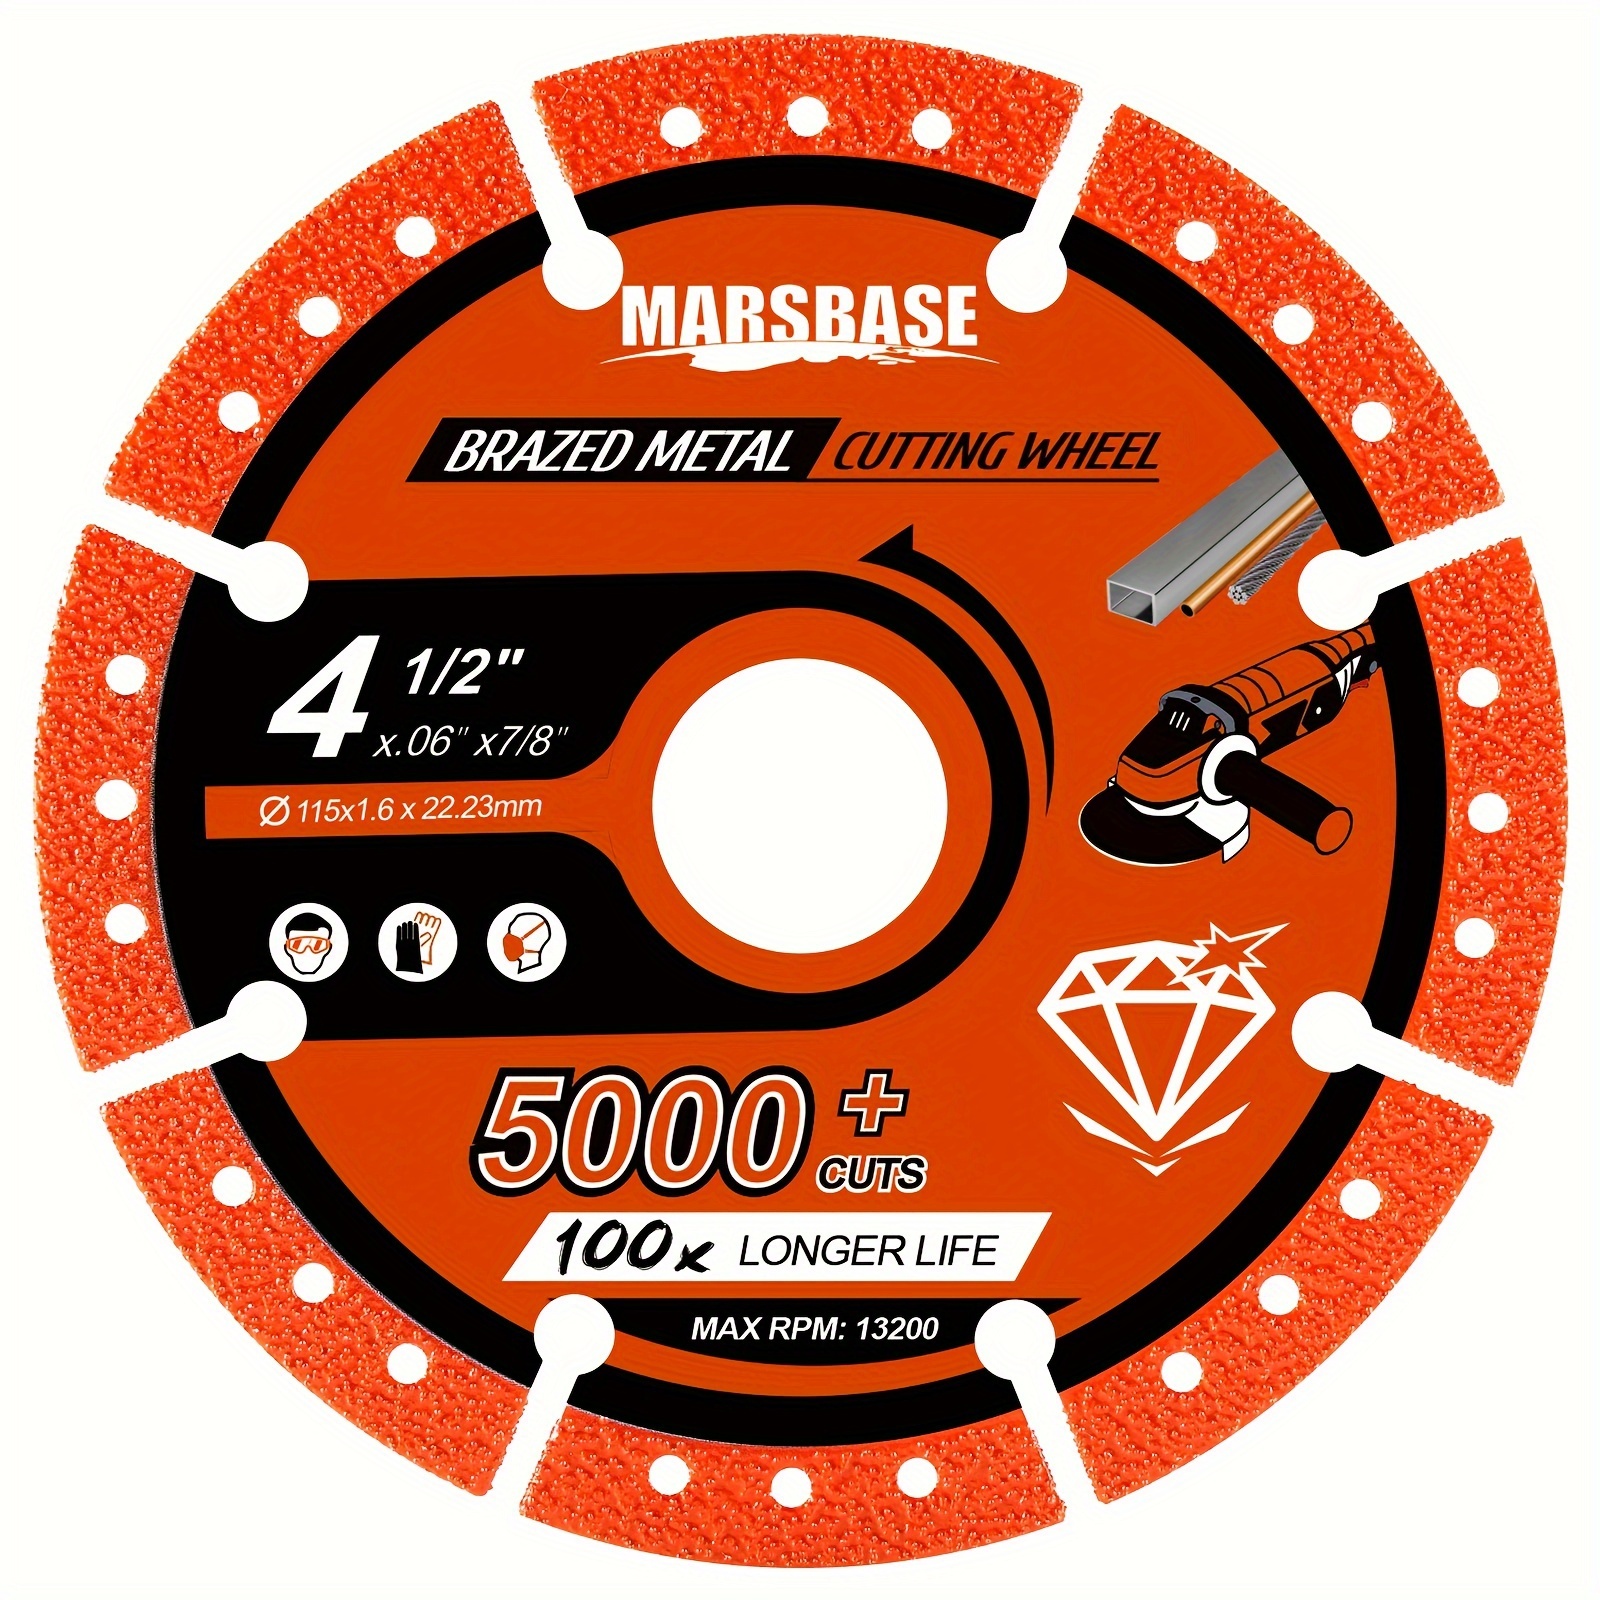 

Cut Off Wheels 4 1/2 Inch Diamond Brazed Metal Cutting Wheels With 7/8" Arbor Hole Cutting Disc On , Steel, Iron And Inox, With 5/8" 4/5" Adapters